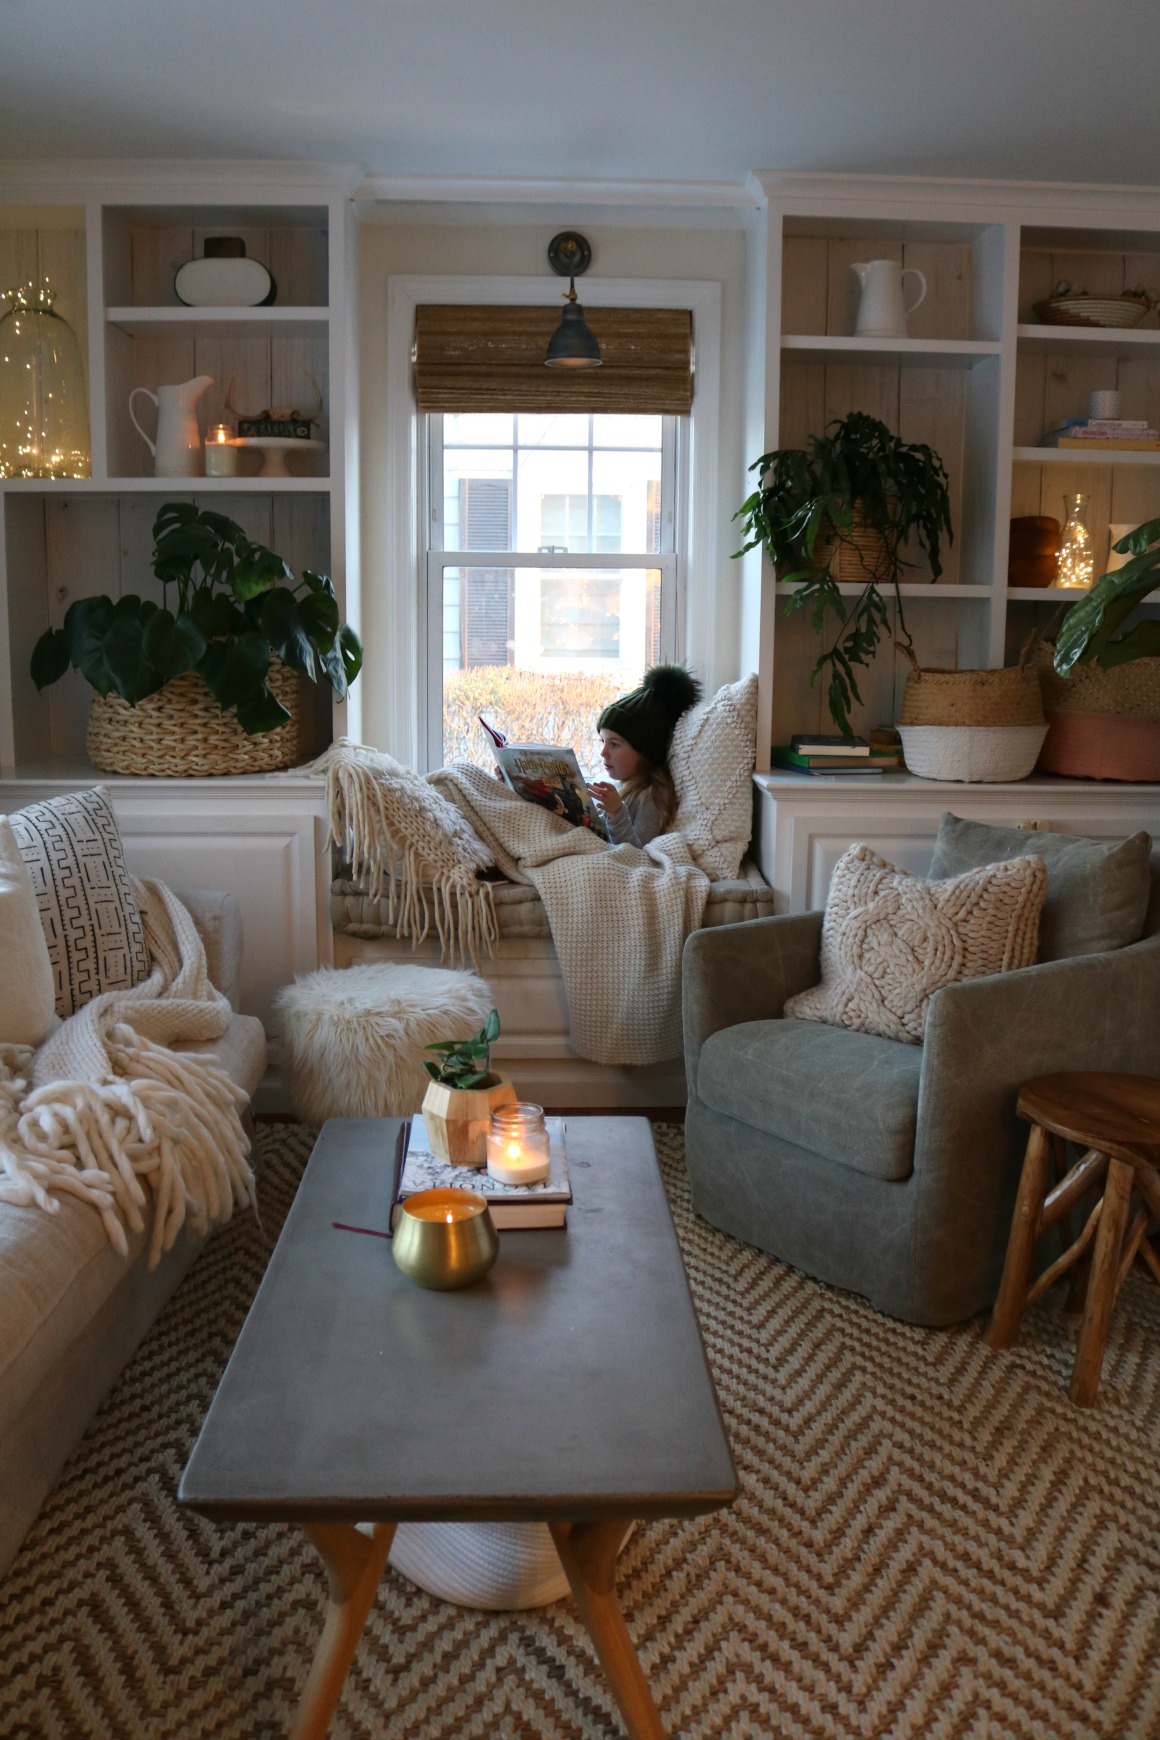 How to Have a Cozy Home- 4 Simple Tips!